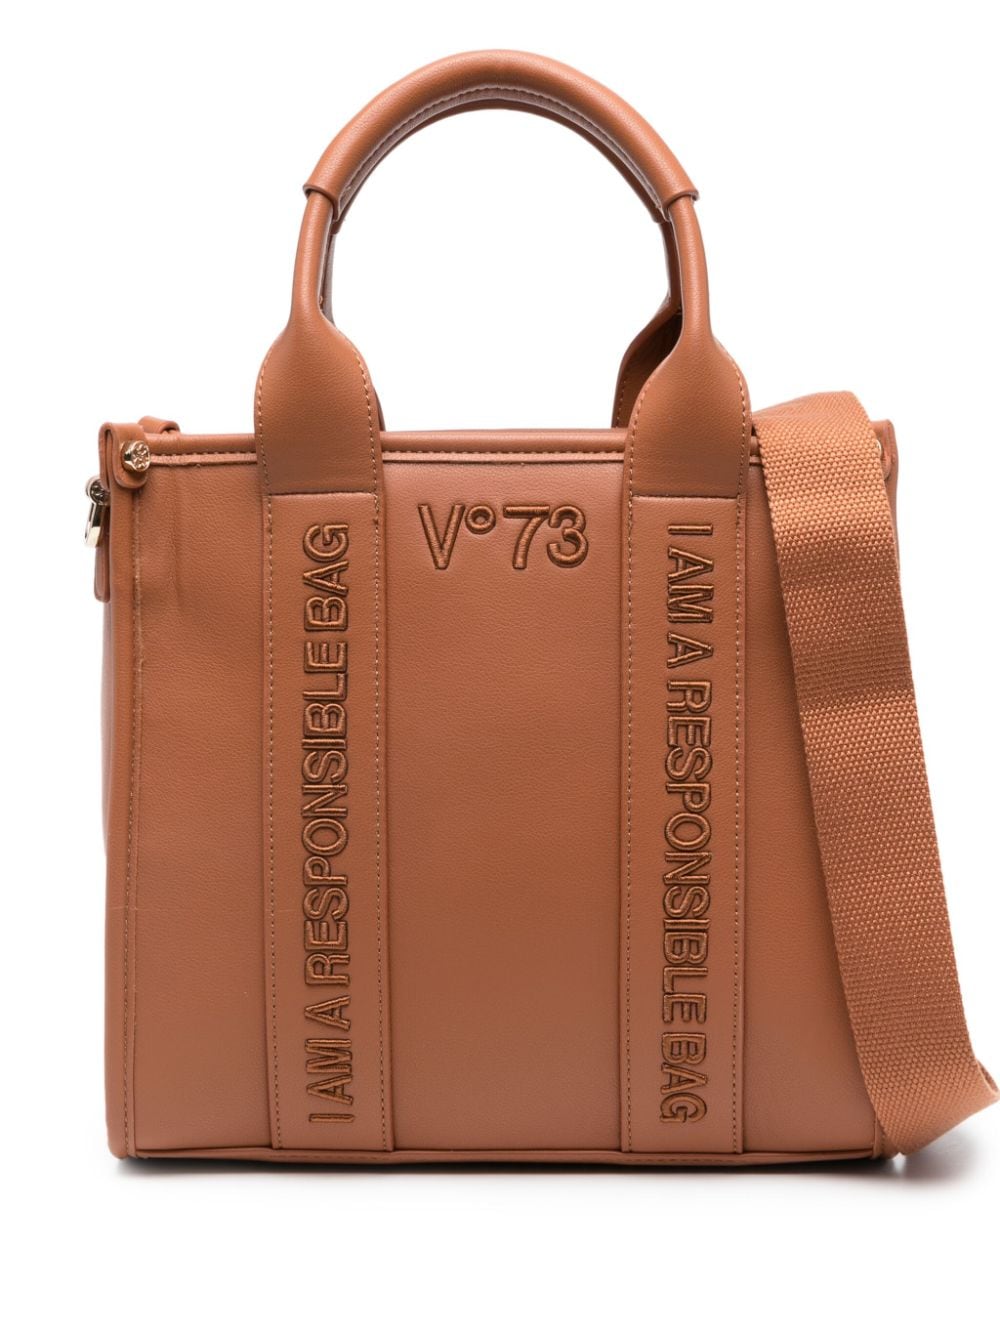 V73 Small Shopping Echo 73 Tote Bag In Brown